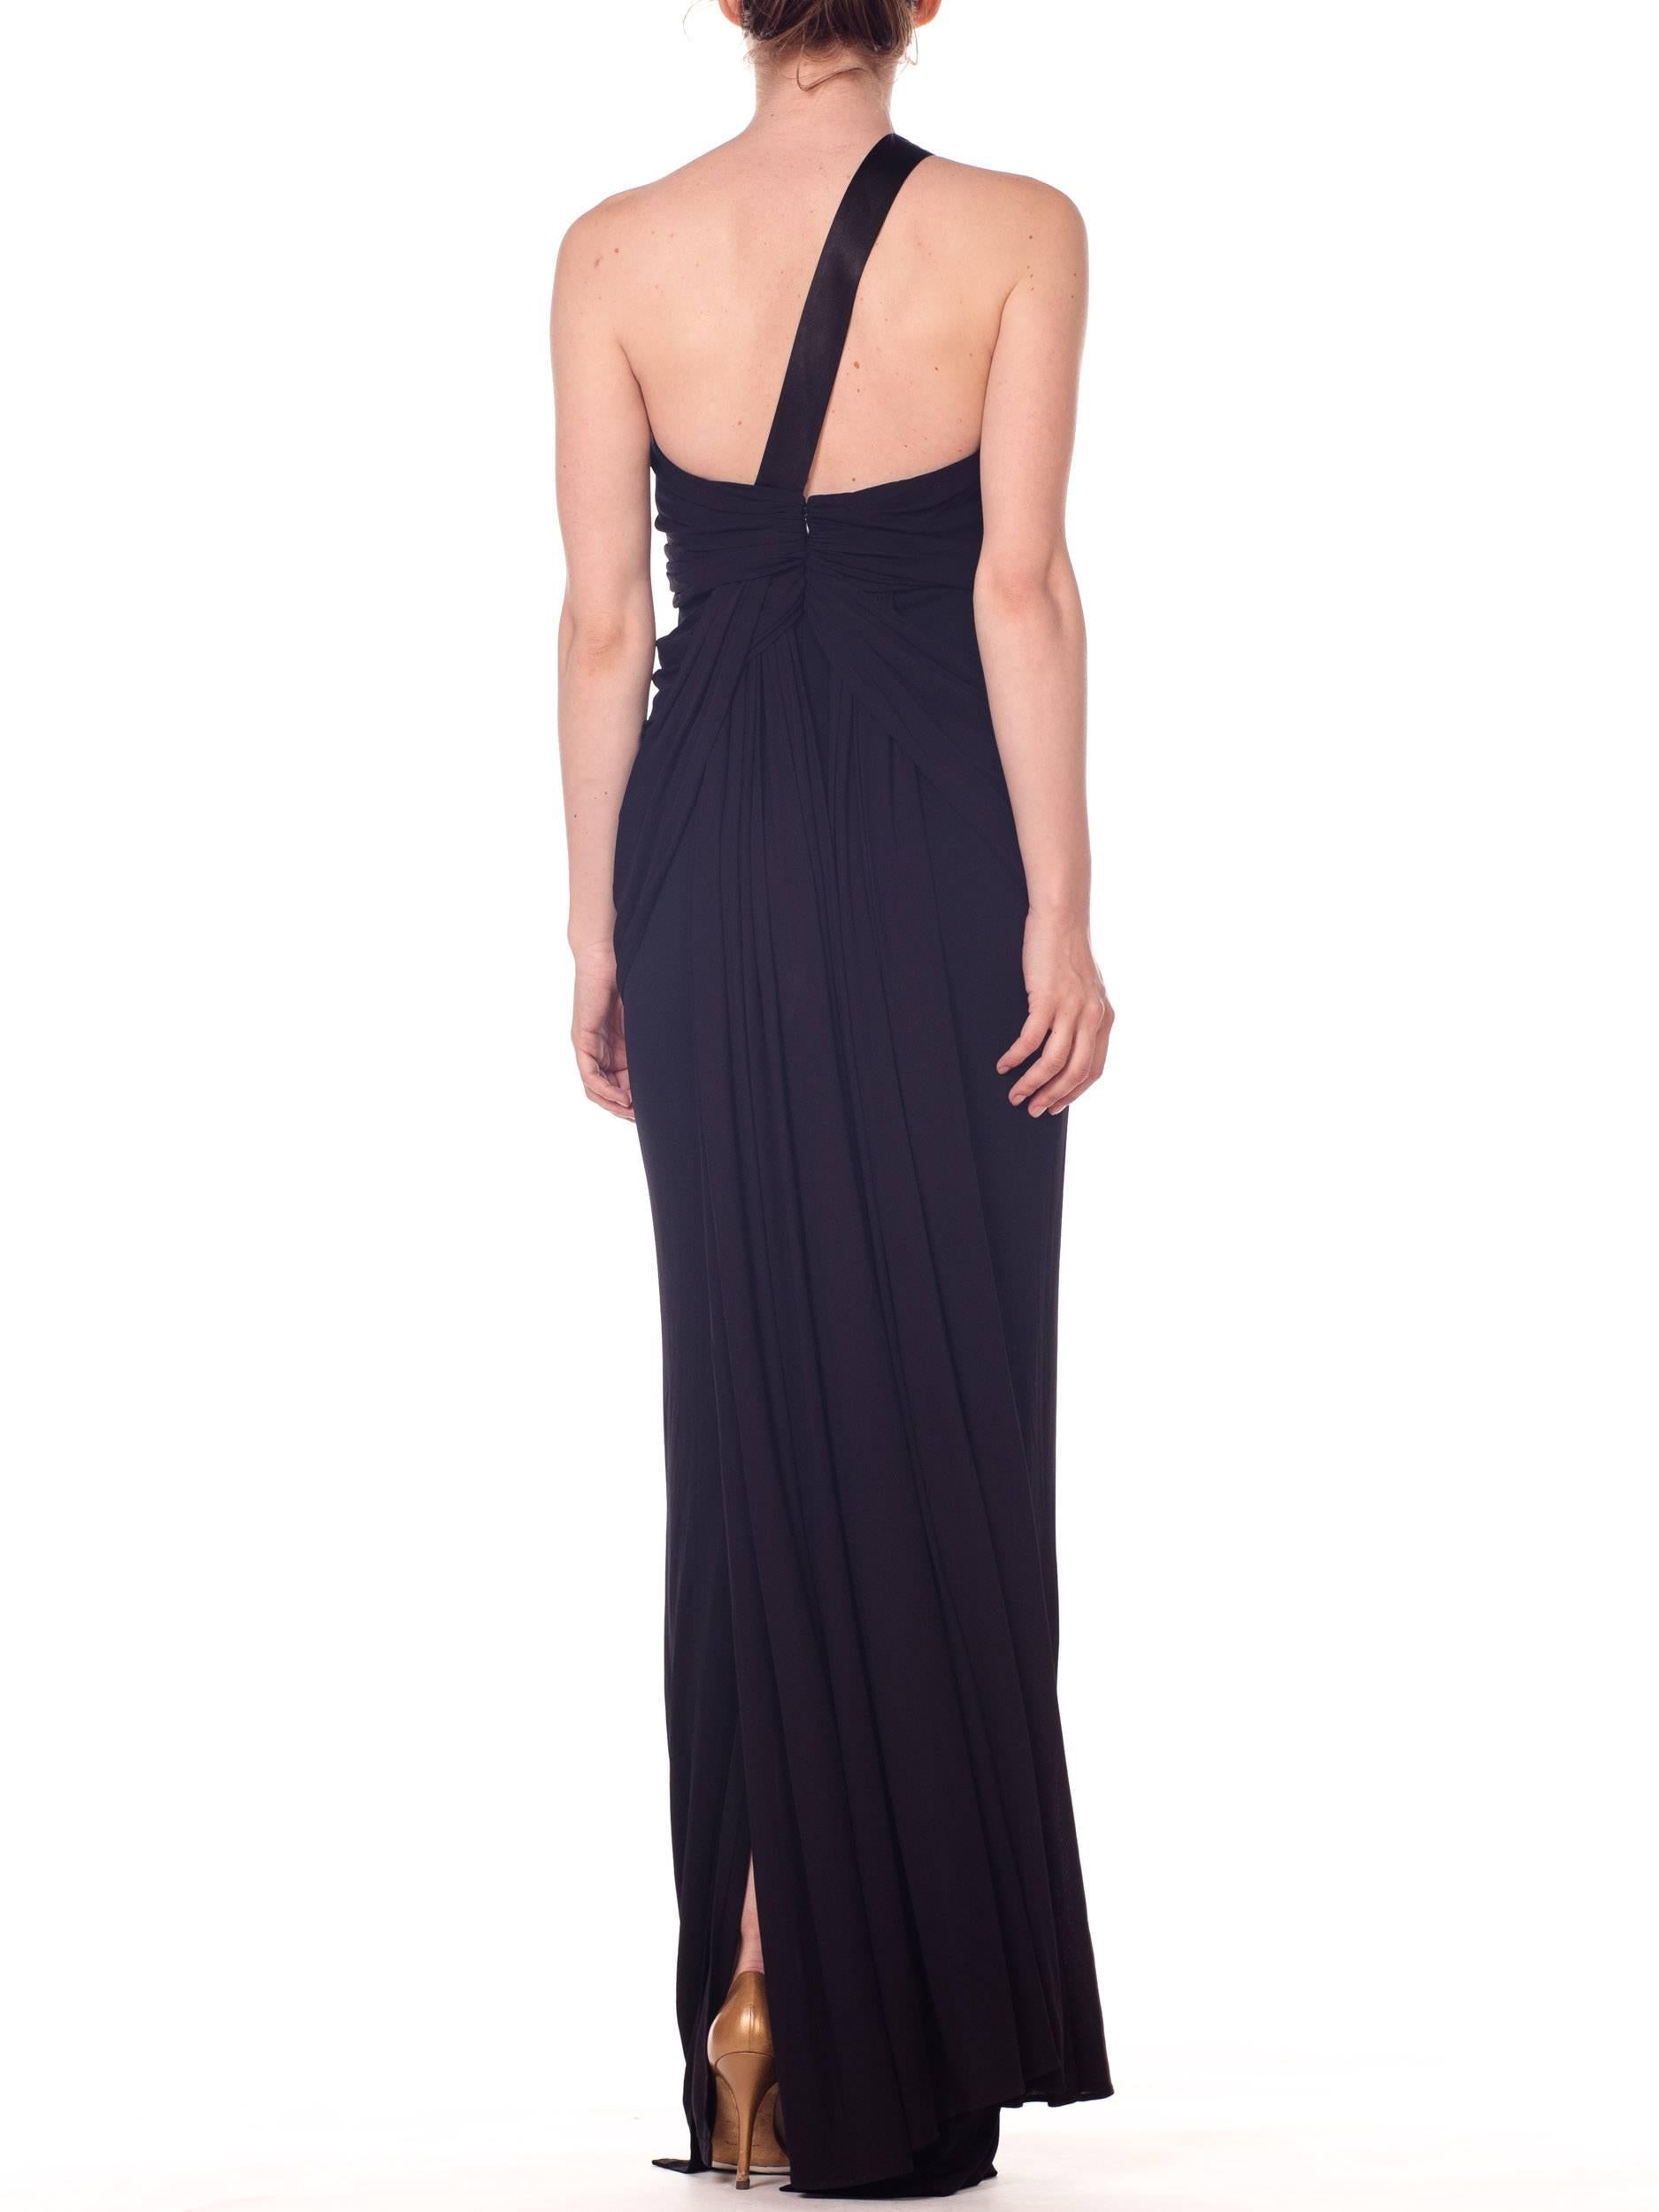 2000S Black Poly/Viscose Jersey Slinky Asymmetrically Draped Gown In Excellent Condition For Sale In New York, NY